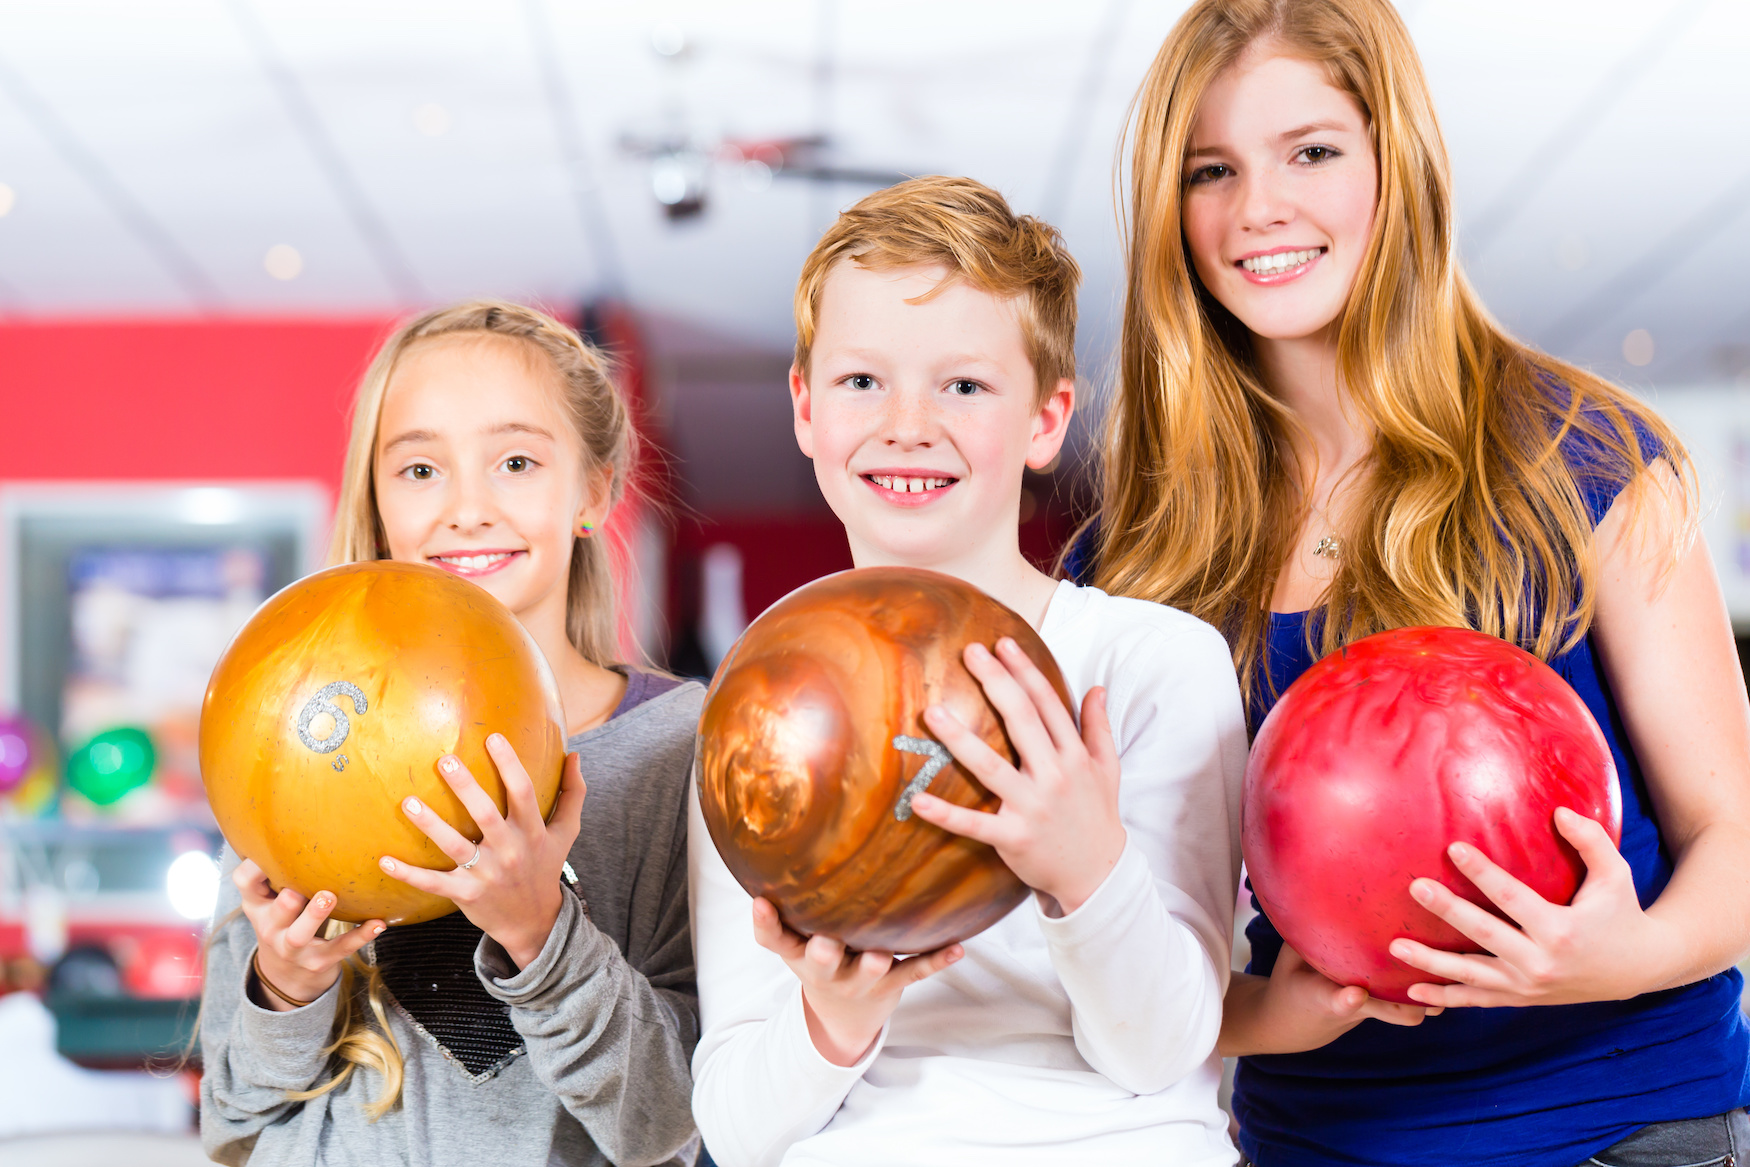 kids bowling at a bowing alley